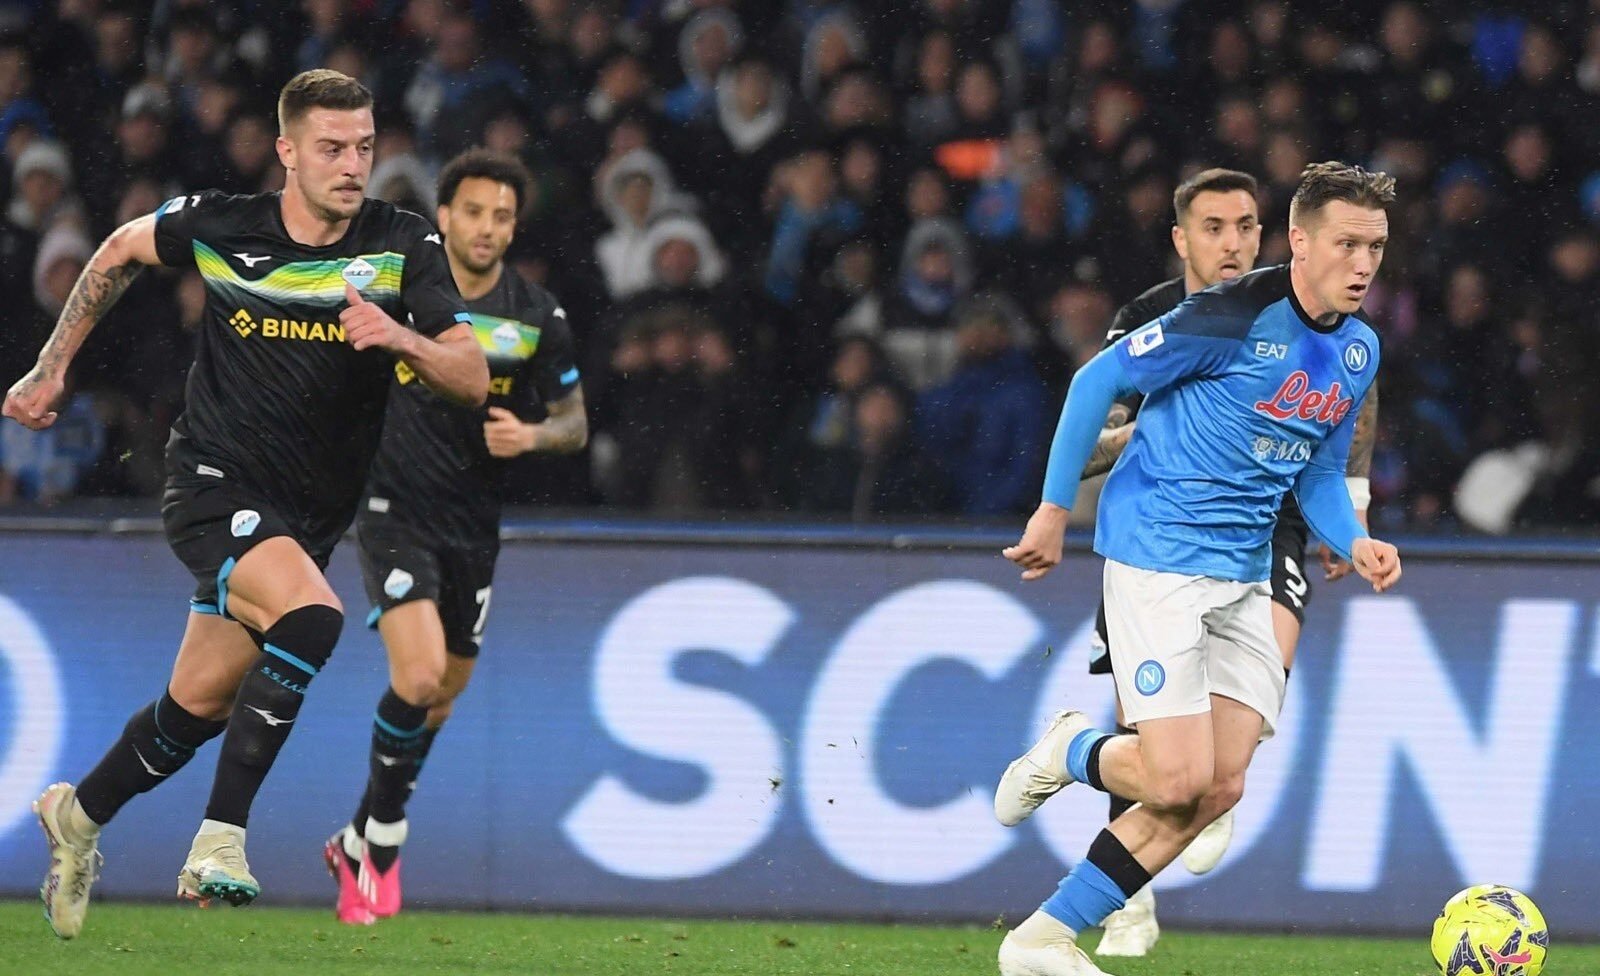 Napoli concede first home defeat in Serie A